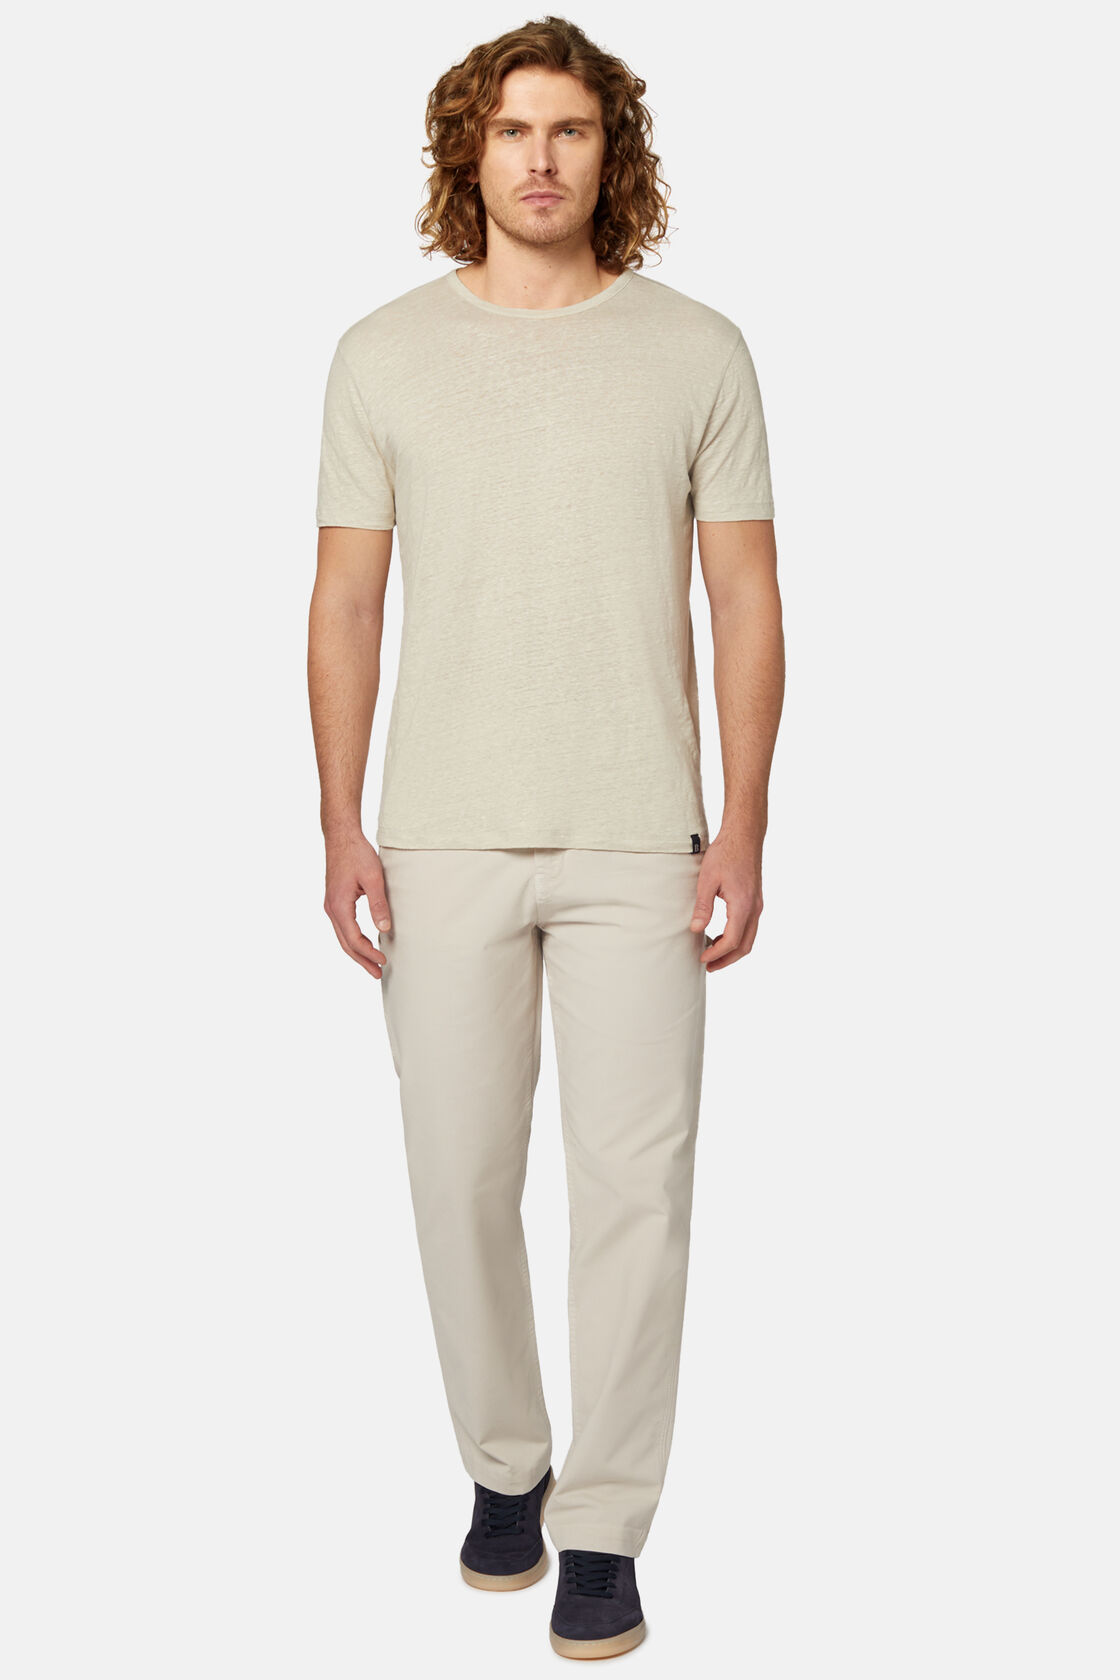 T-Shirt in Stretch Linen Jersey, Sand, hi-res